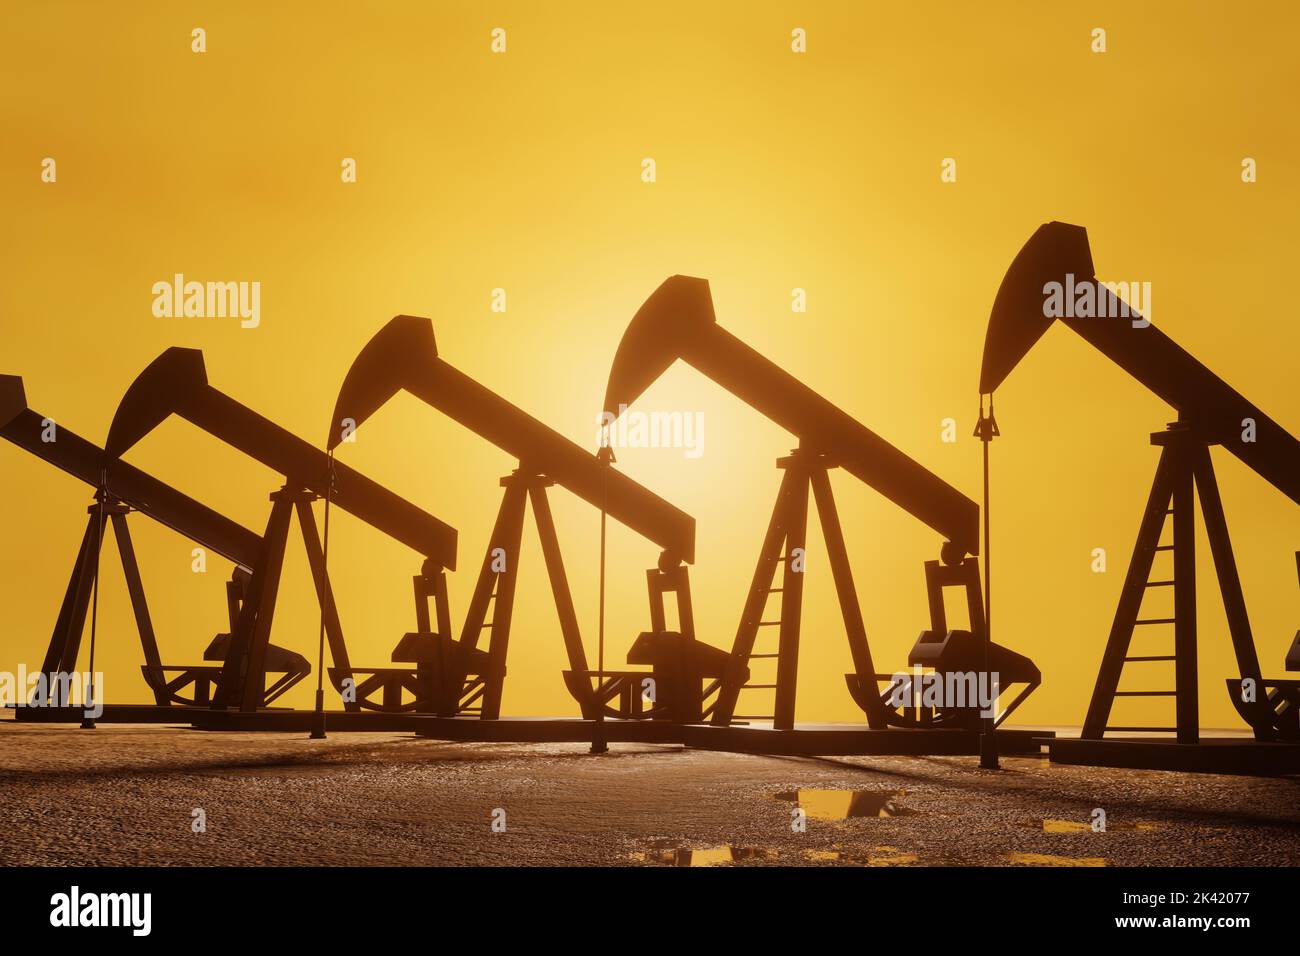 Silhouettes of petroleum wells collecting crude oil at sunset. Illustration of black oil production and soaring oil price Stock Photo